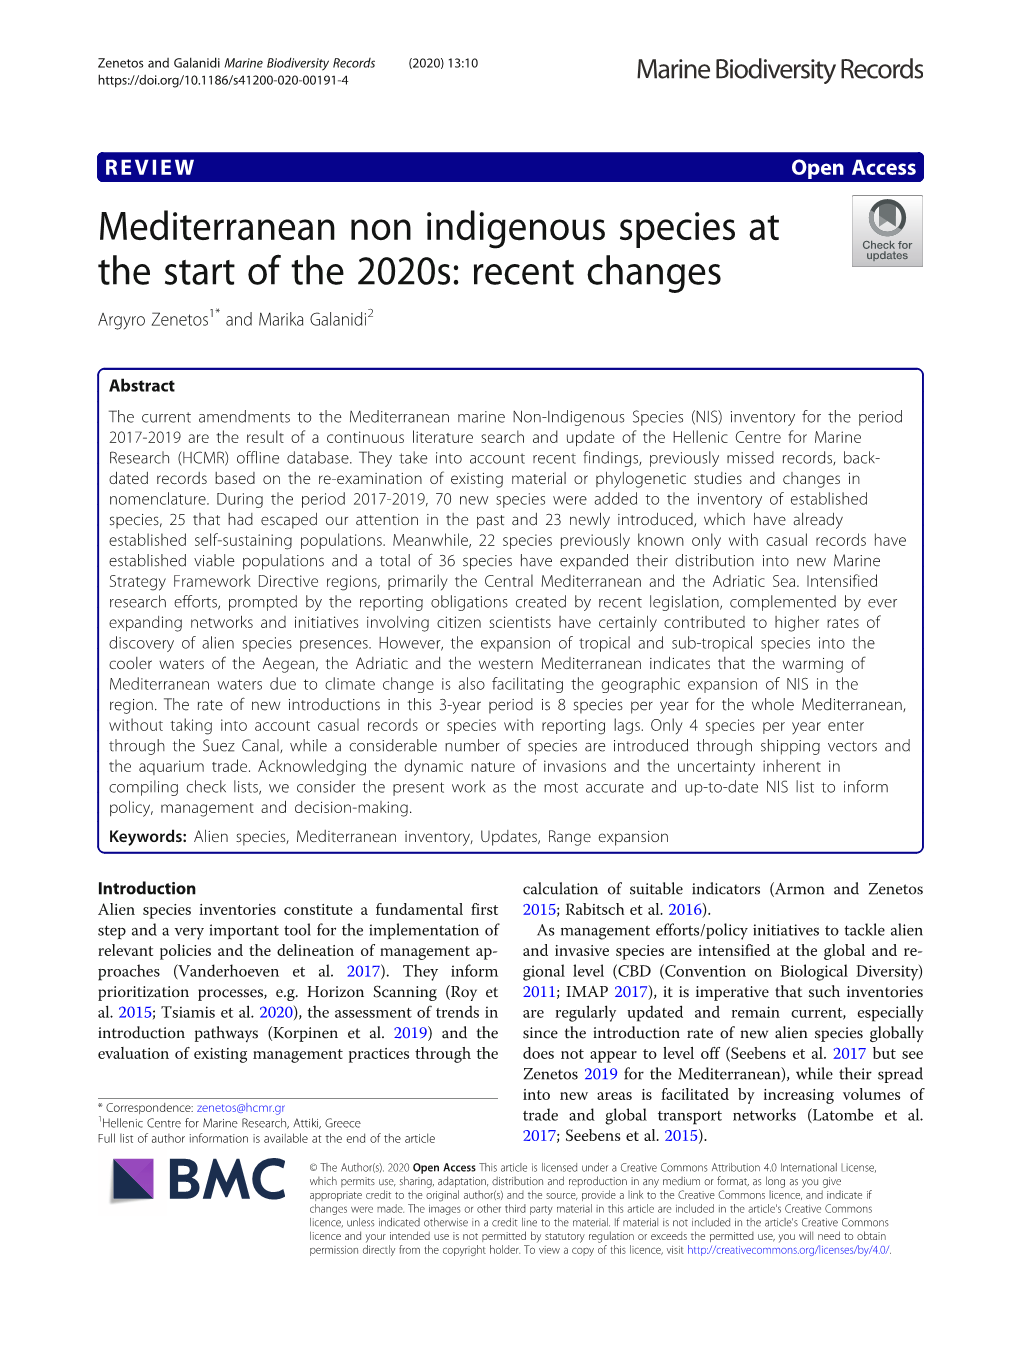 Mediterranean Non Indigenous Species at the Start of the 2020S: Recent Changes Argyro Zenetos1* and Marika Galanidi2